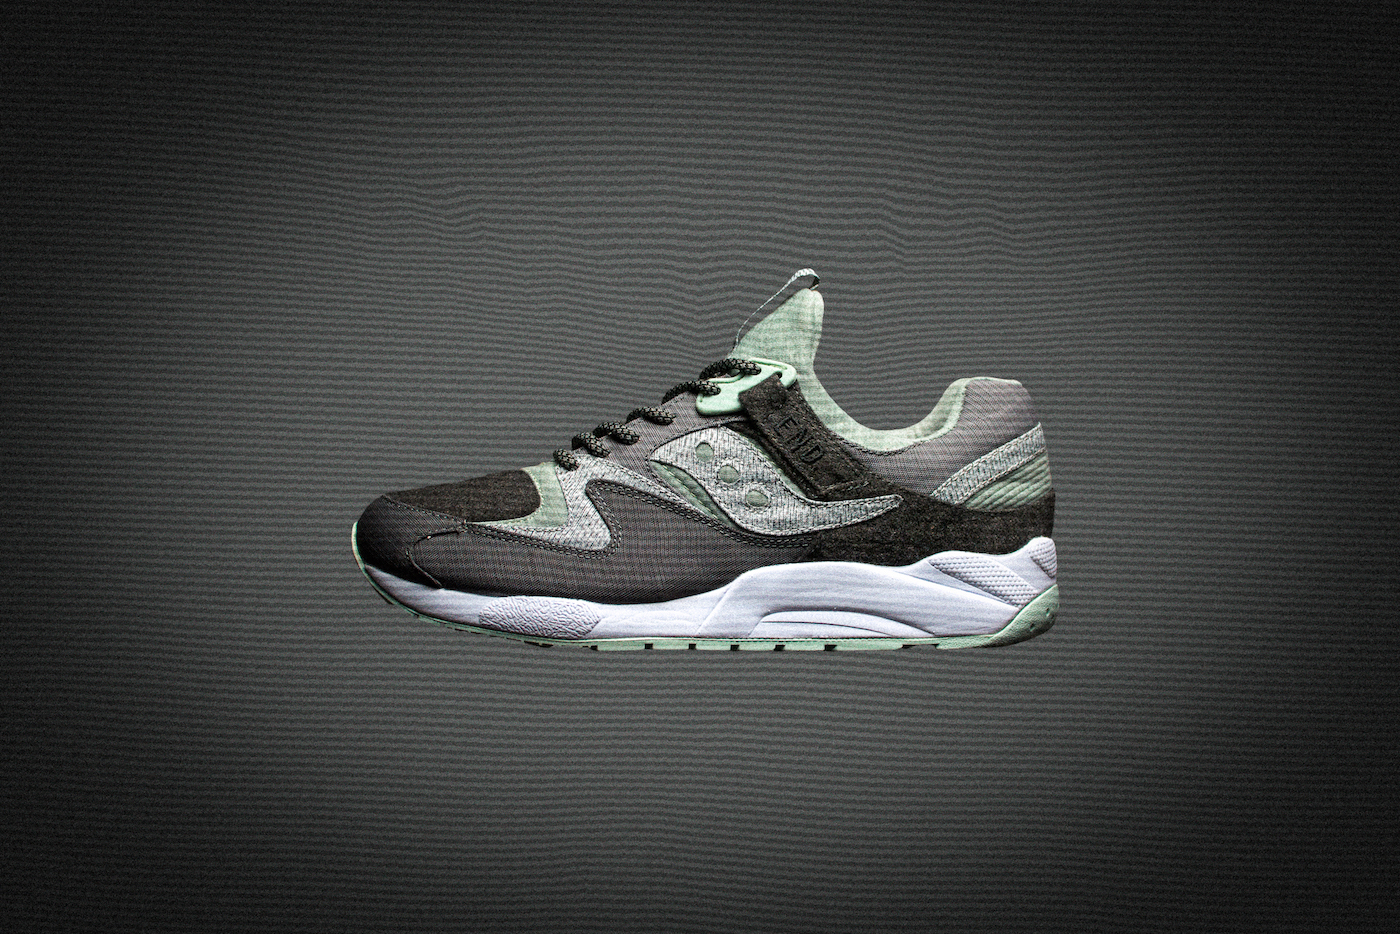 end clothing x saucony grid 9000 white noise